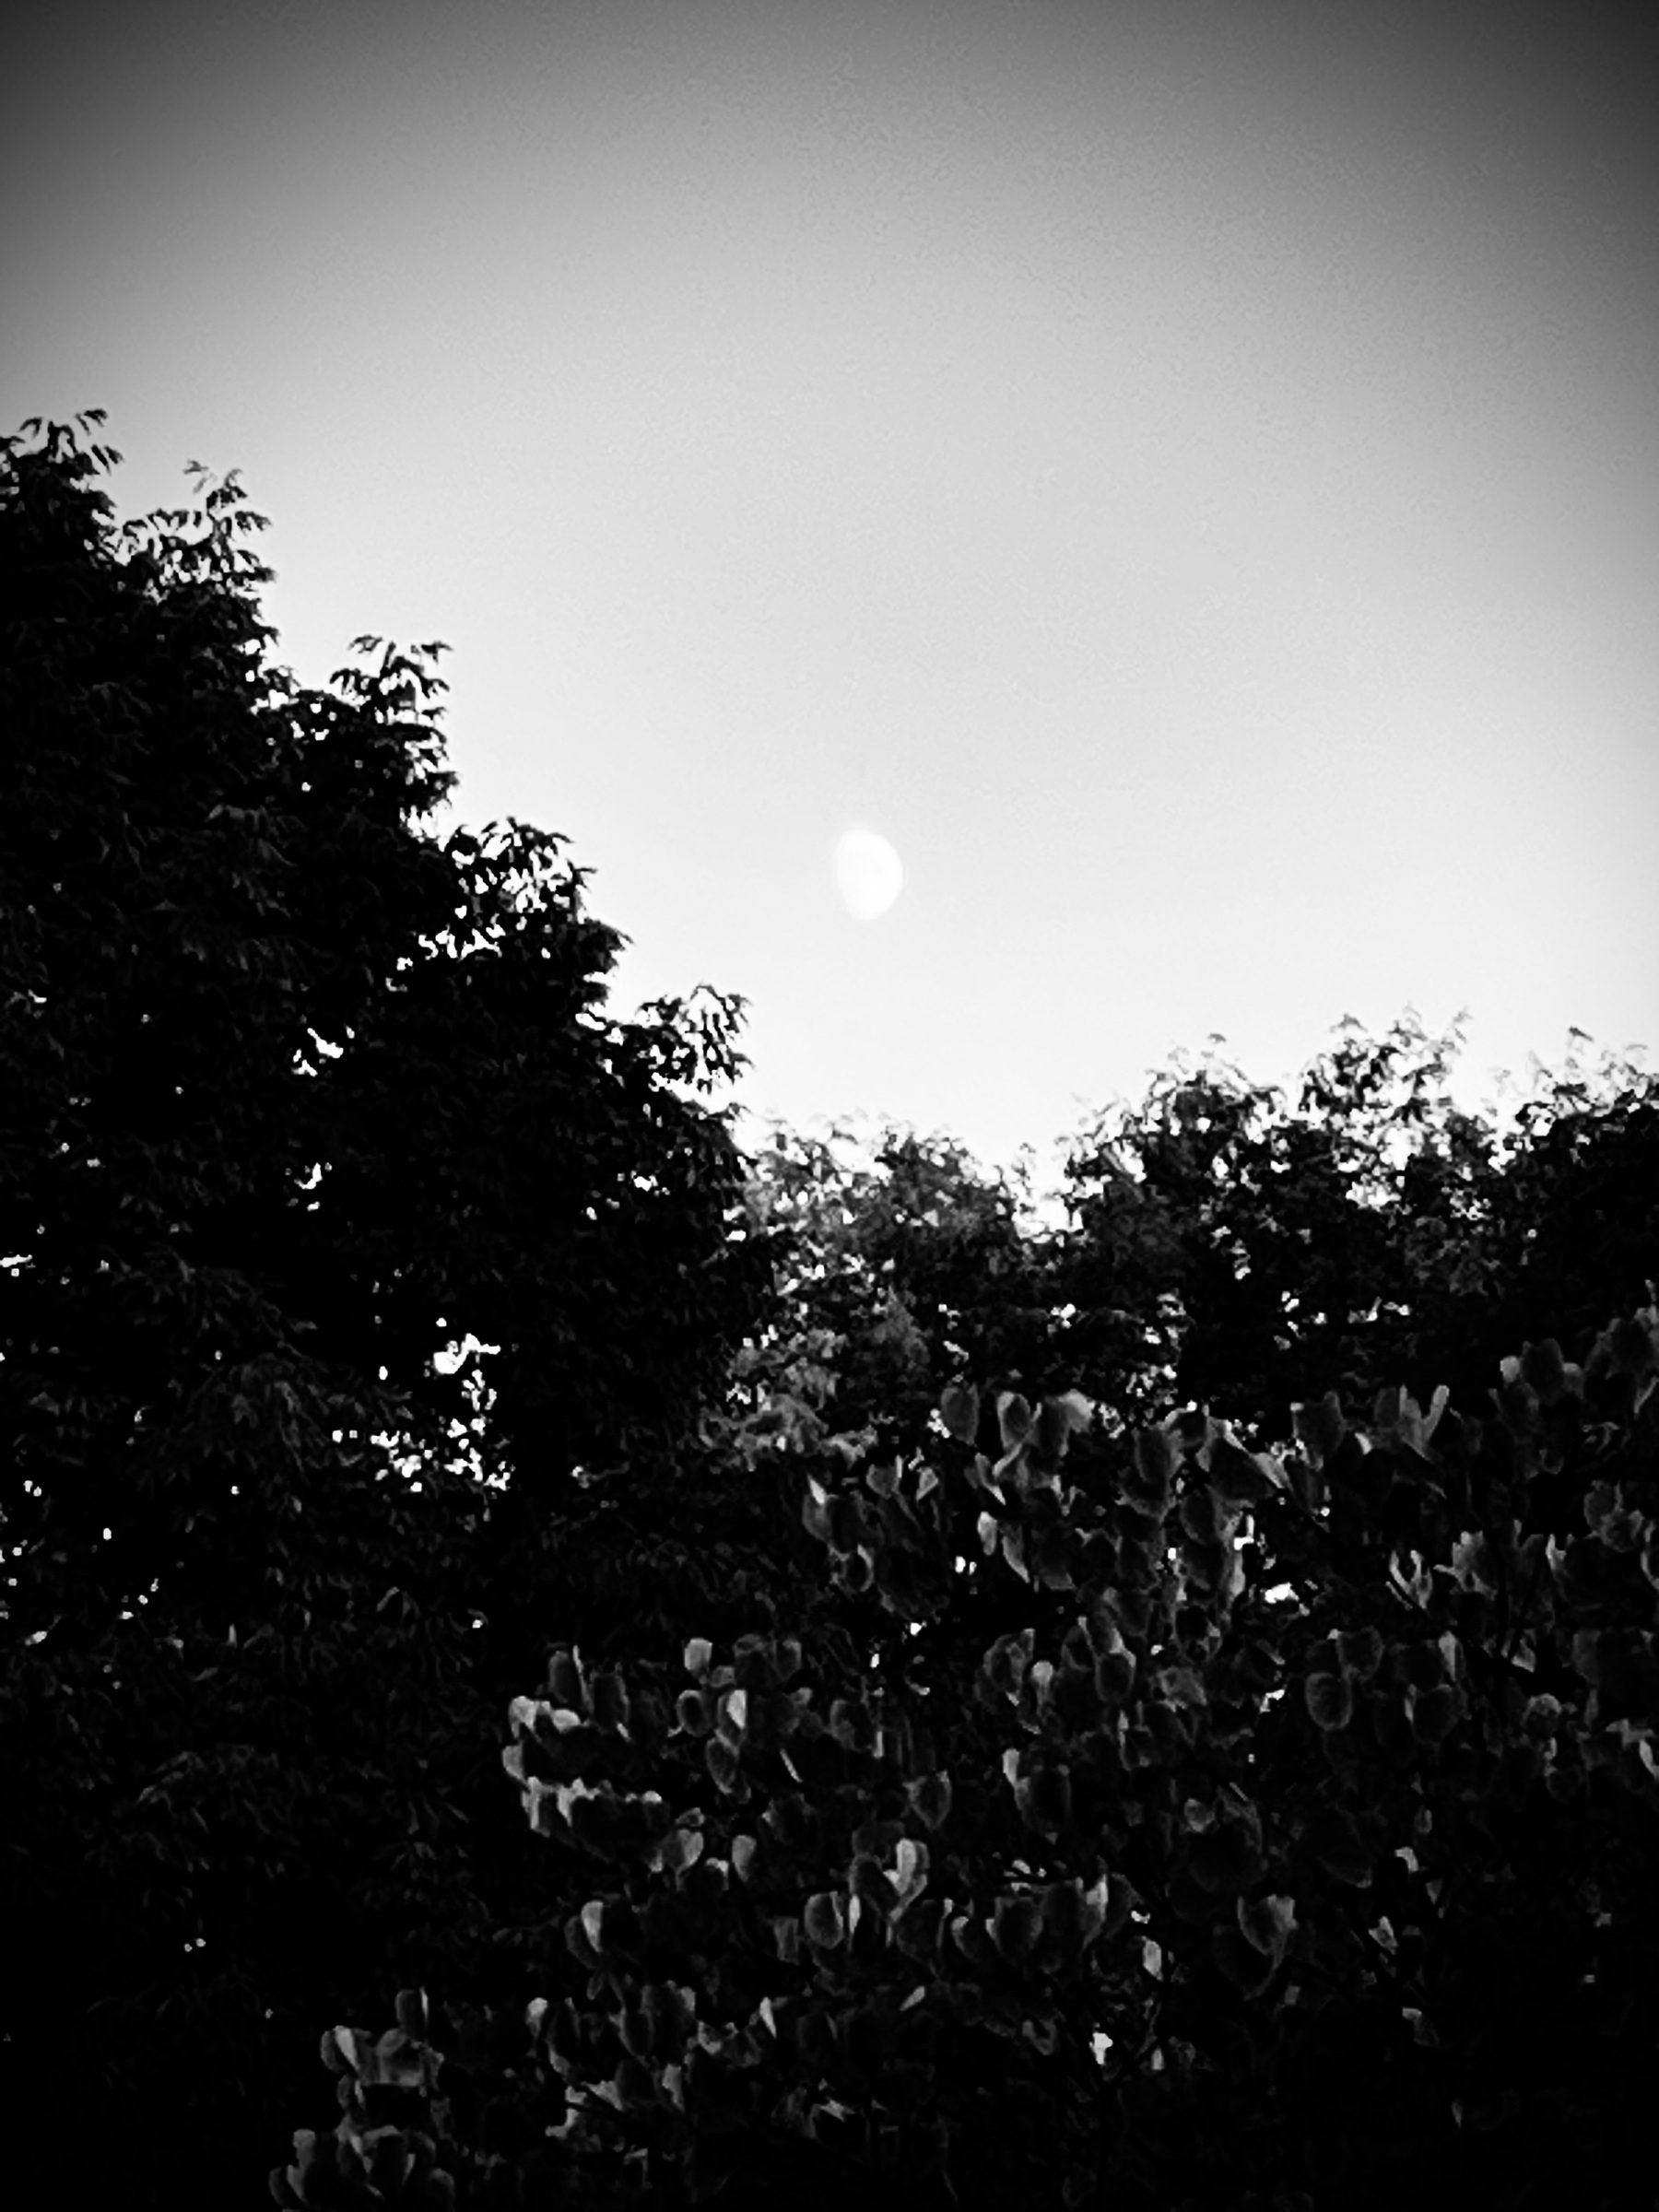 Black and white photo of trees in the foreground and a 3/4 moon hanging against a cloudless sky